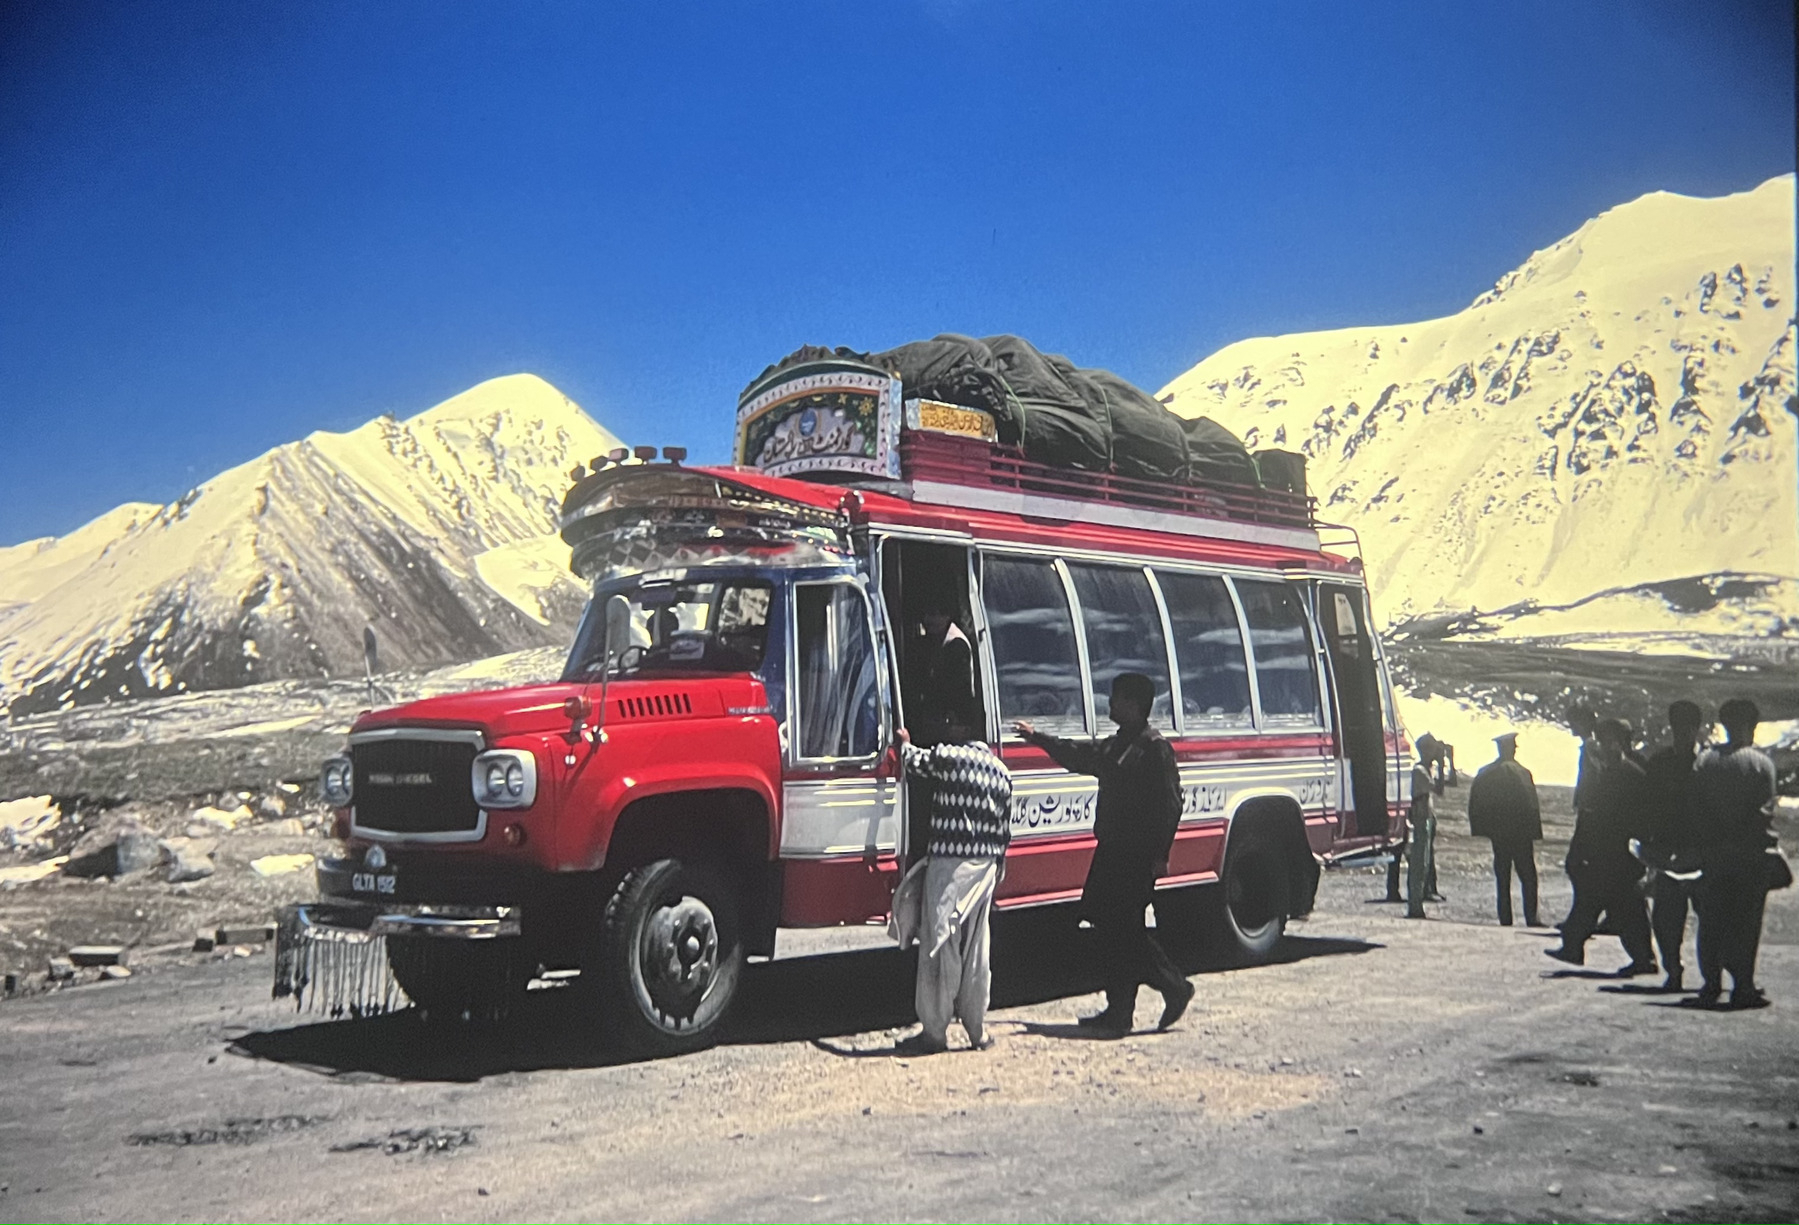 A colourful red and white Pakistan bus parked at the Khunjerab Pass. People walk around with snow covered mountains around